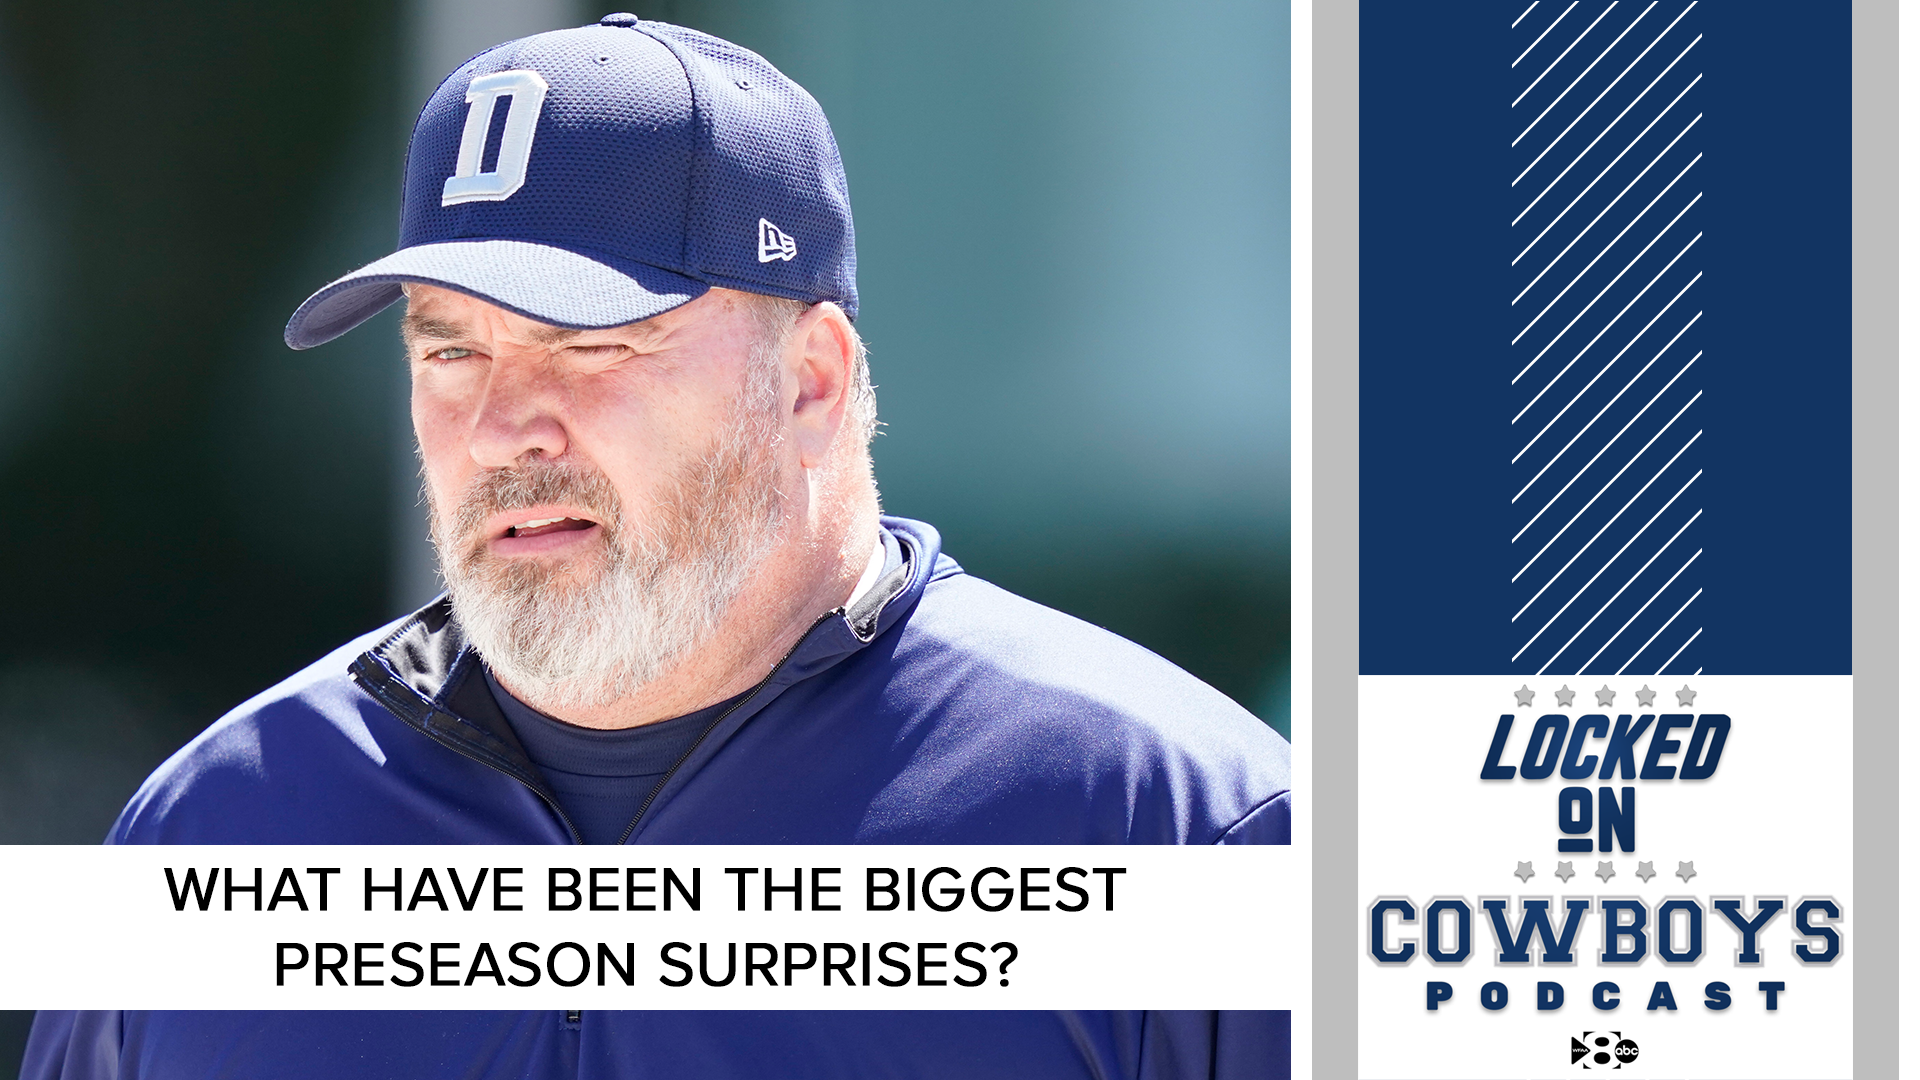 @Marcus_Mosher and @McCoolBCB discuss the players that have been the biggest preseason surprises for the Dallas Cowboys.